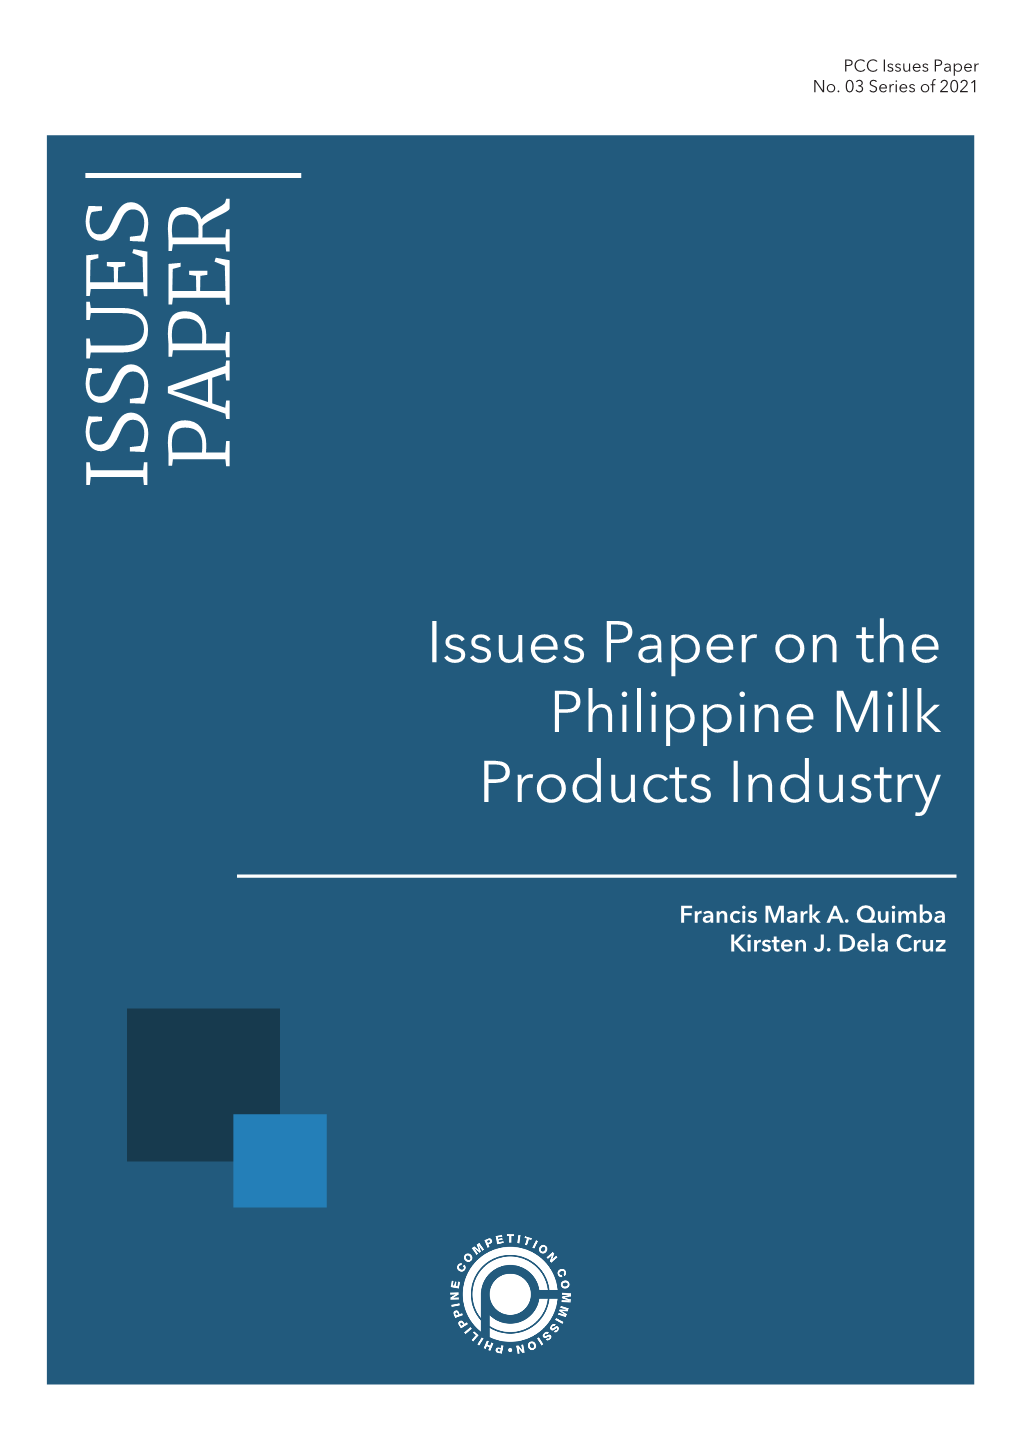 PCC-Issues-Paper-2021-03-Issues-Paper-On-The-Philippine-Milk-Products-Industry.Pdf